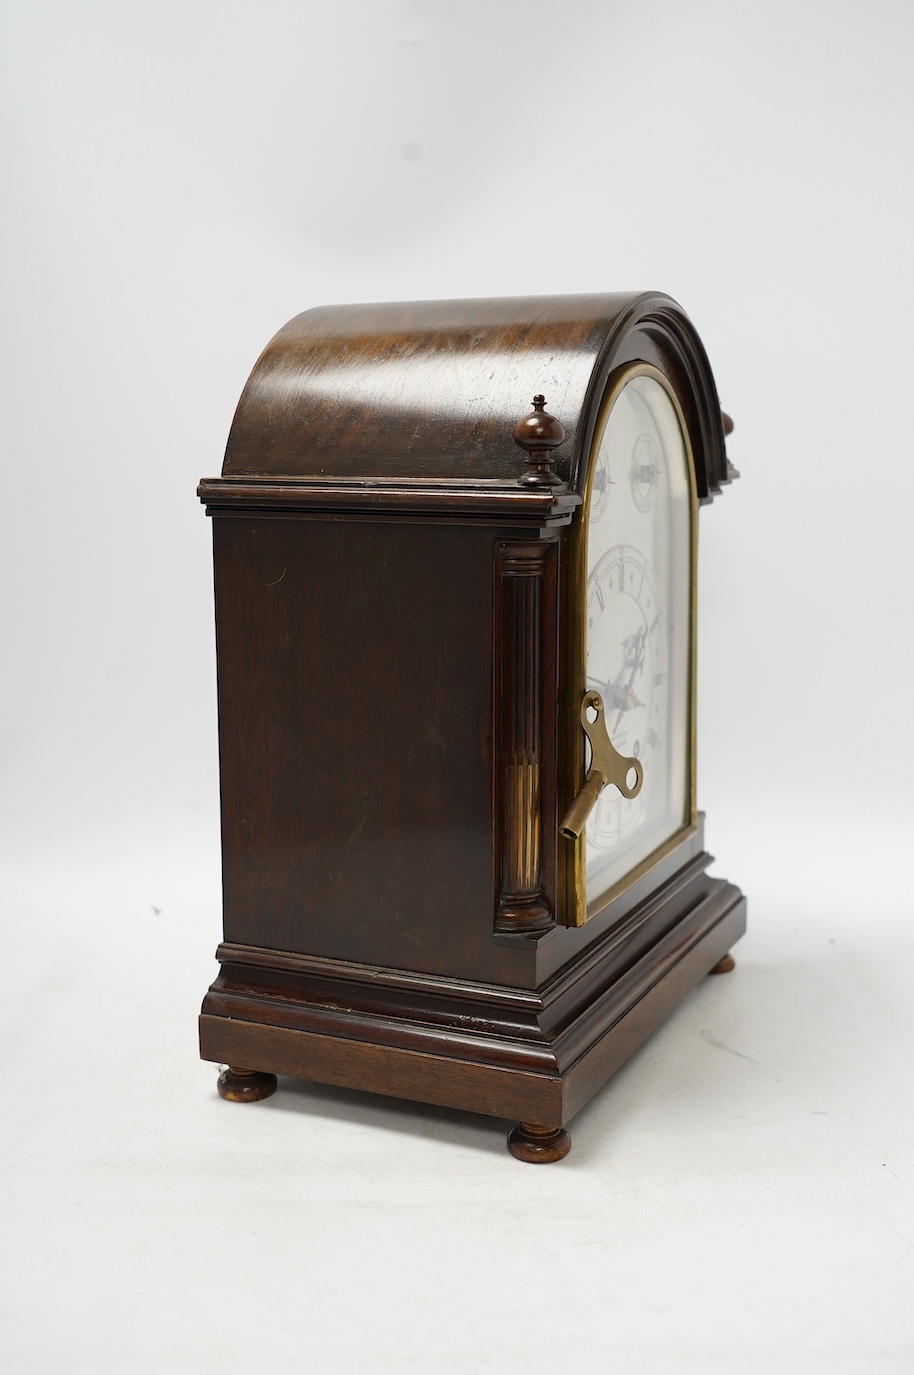 A W&H Sch. mahogany mantel clock striking on two coiled gongs, dial signed T. Braybrook Dorchester, 36cm. Condition - good, not tested as working